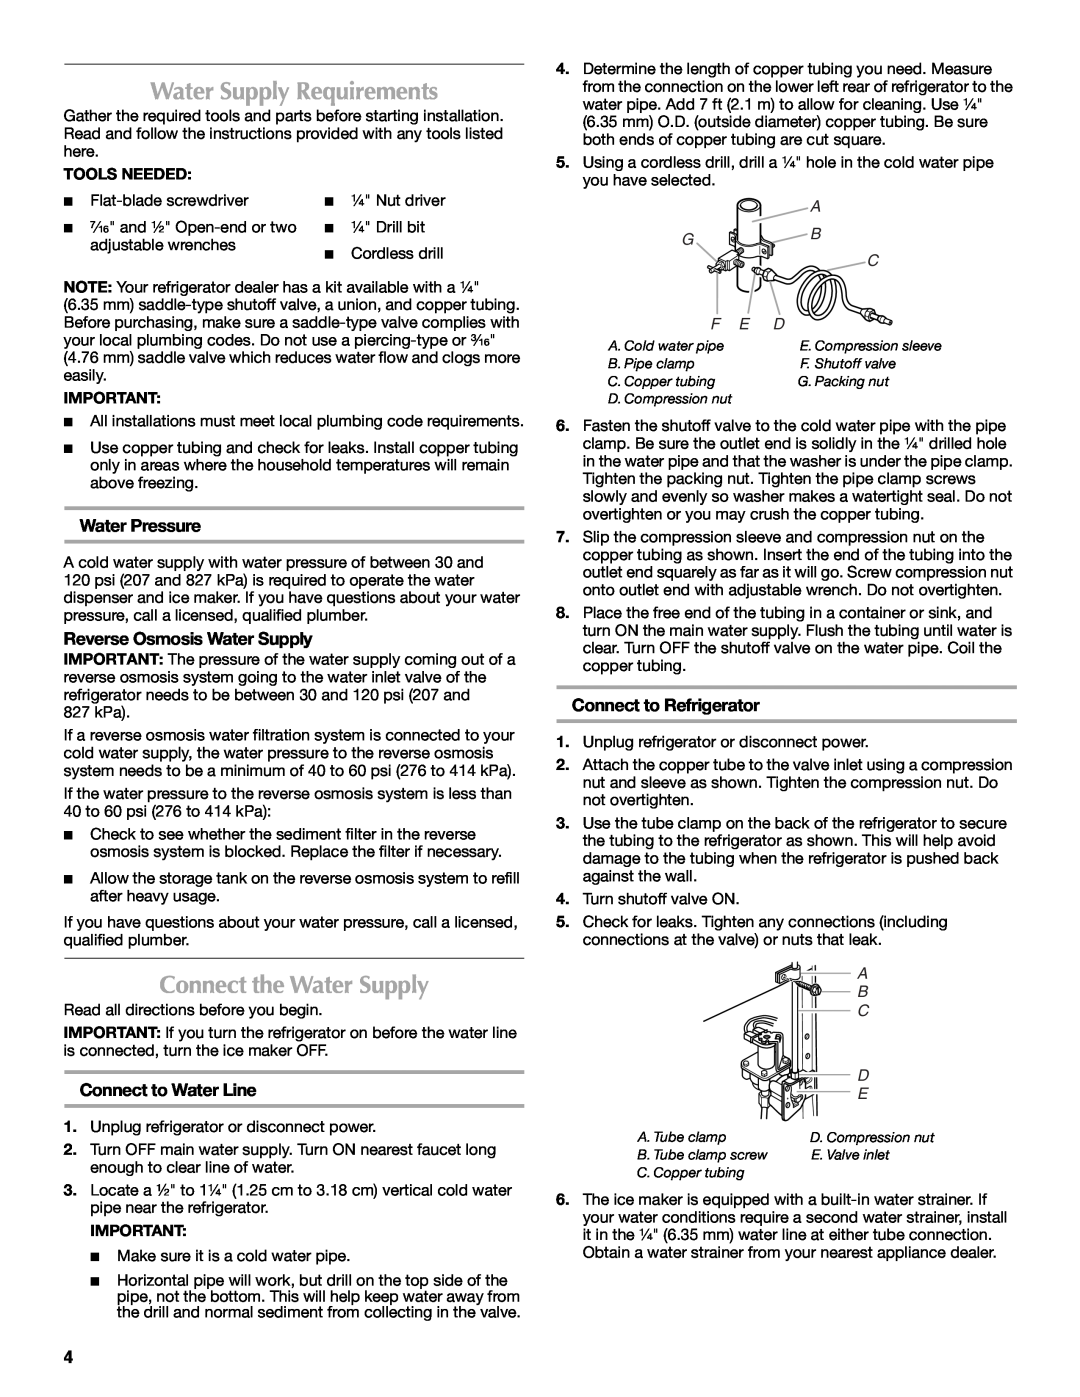 Maytag W10359302A Water Supply Requirements, Connect the Water Supply, Water Pressure, Reverse Osmosis Water Supply 